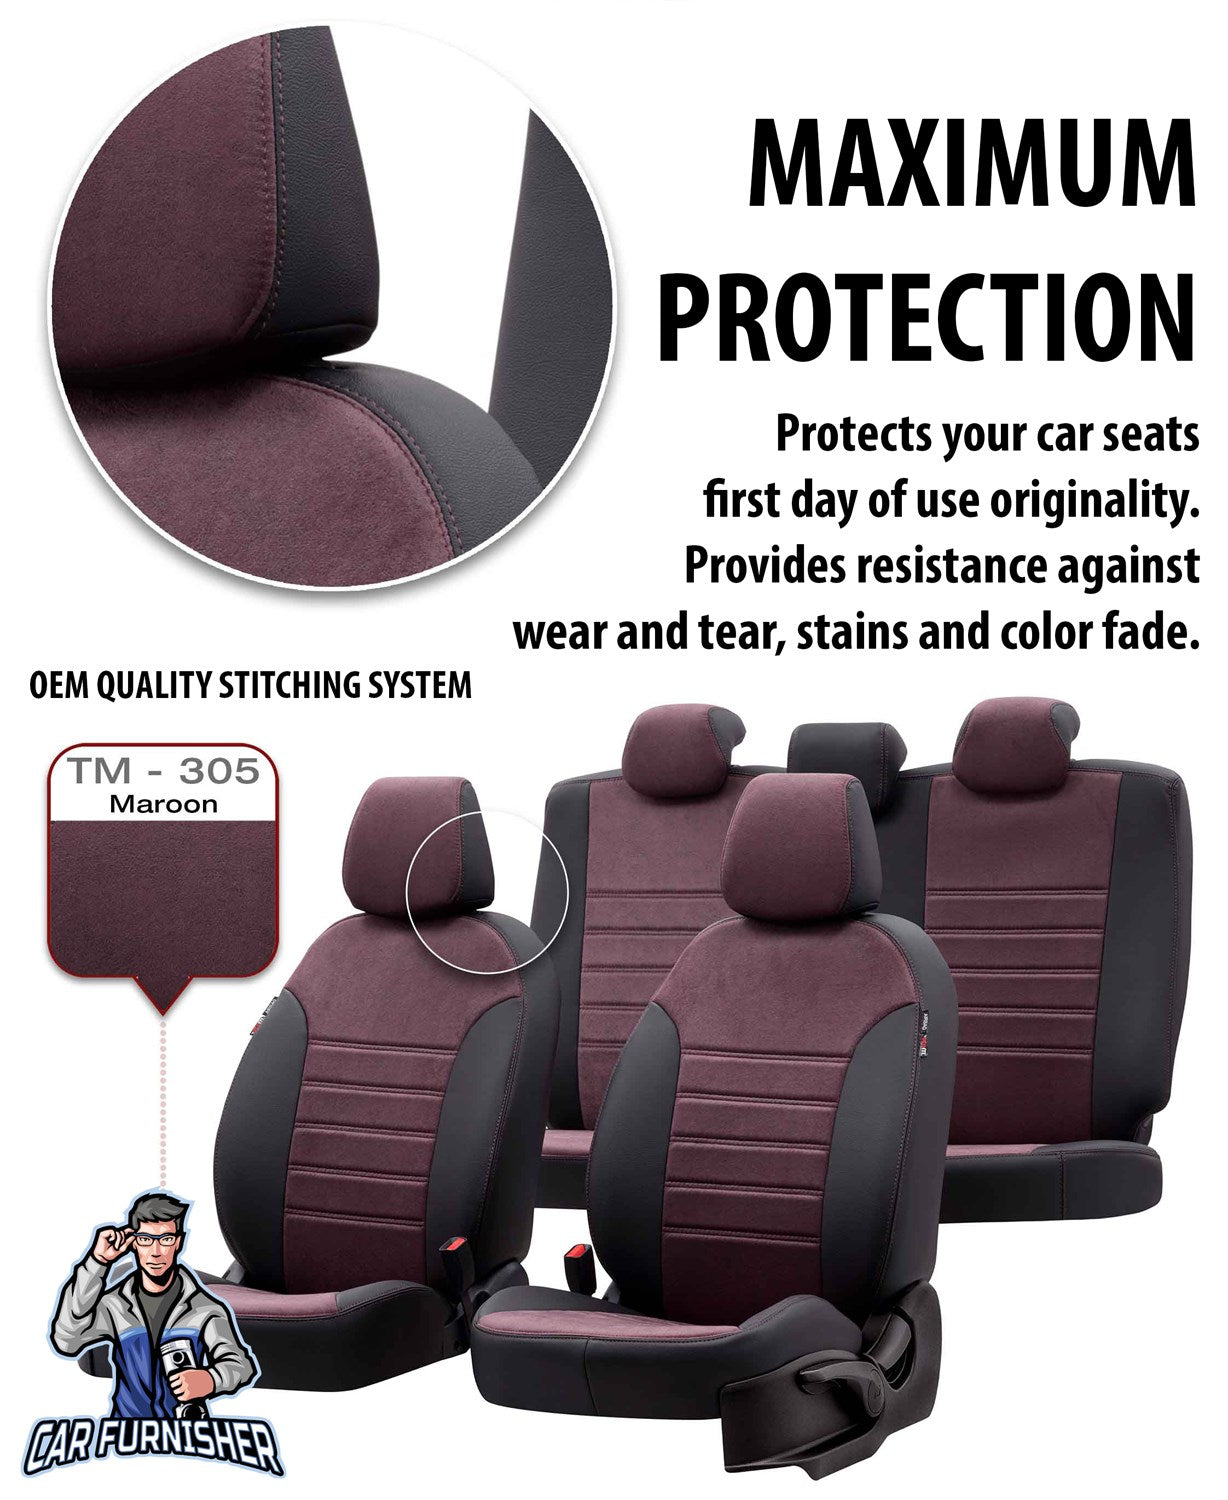 Mitsubishi Spacestar Seat Cover Milano Suede Design Smoked Leather & Suede Fabric